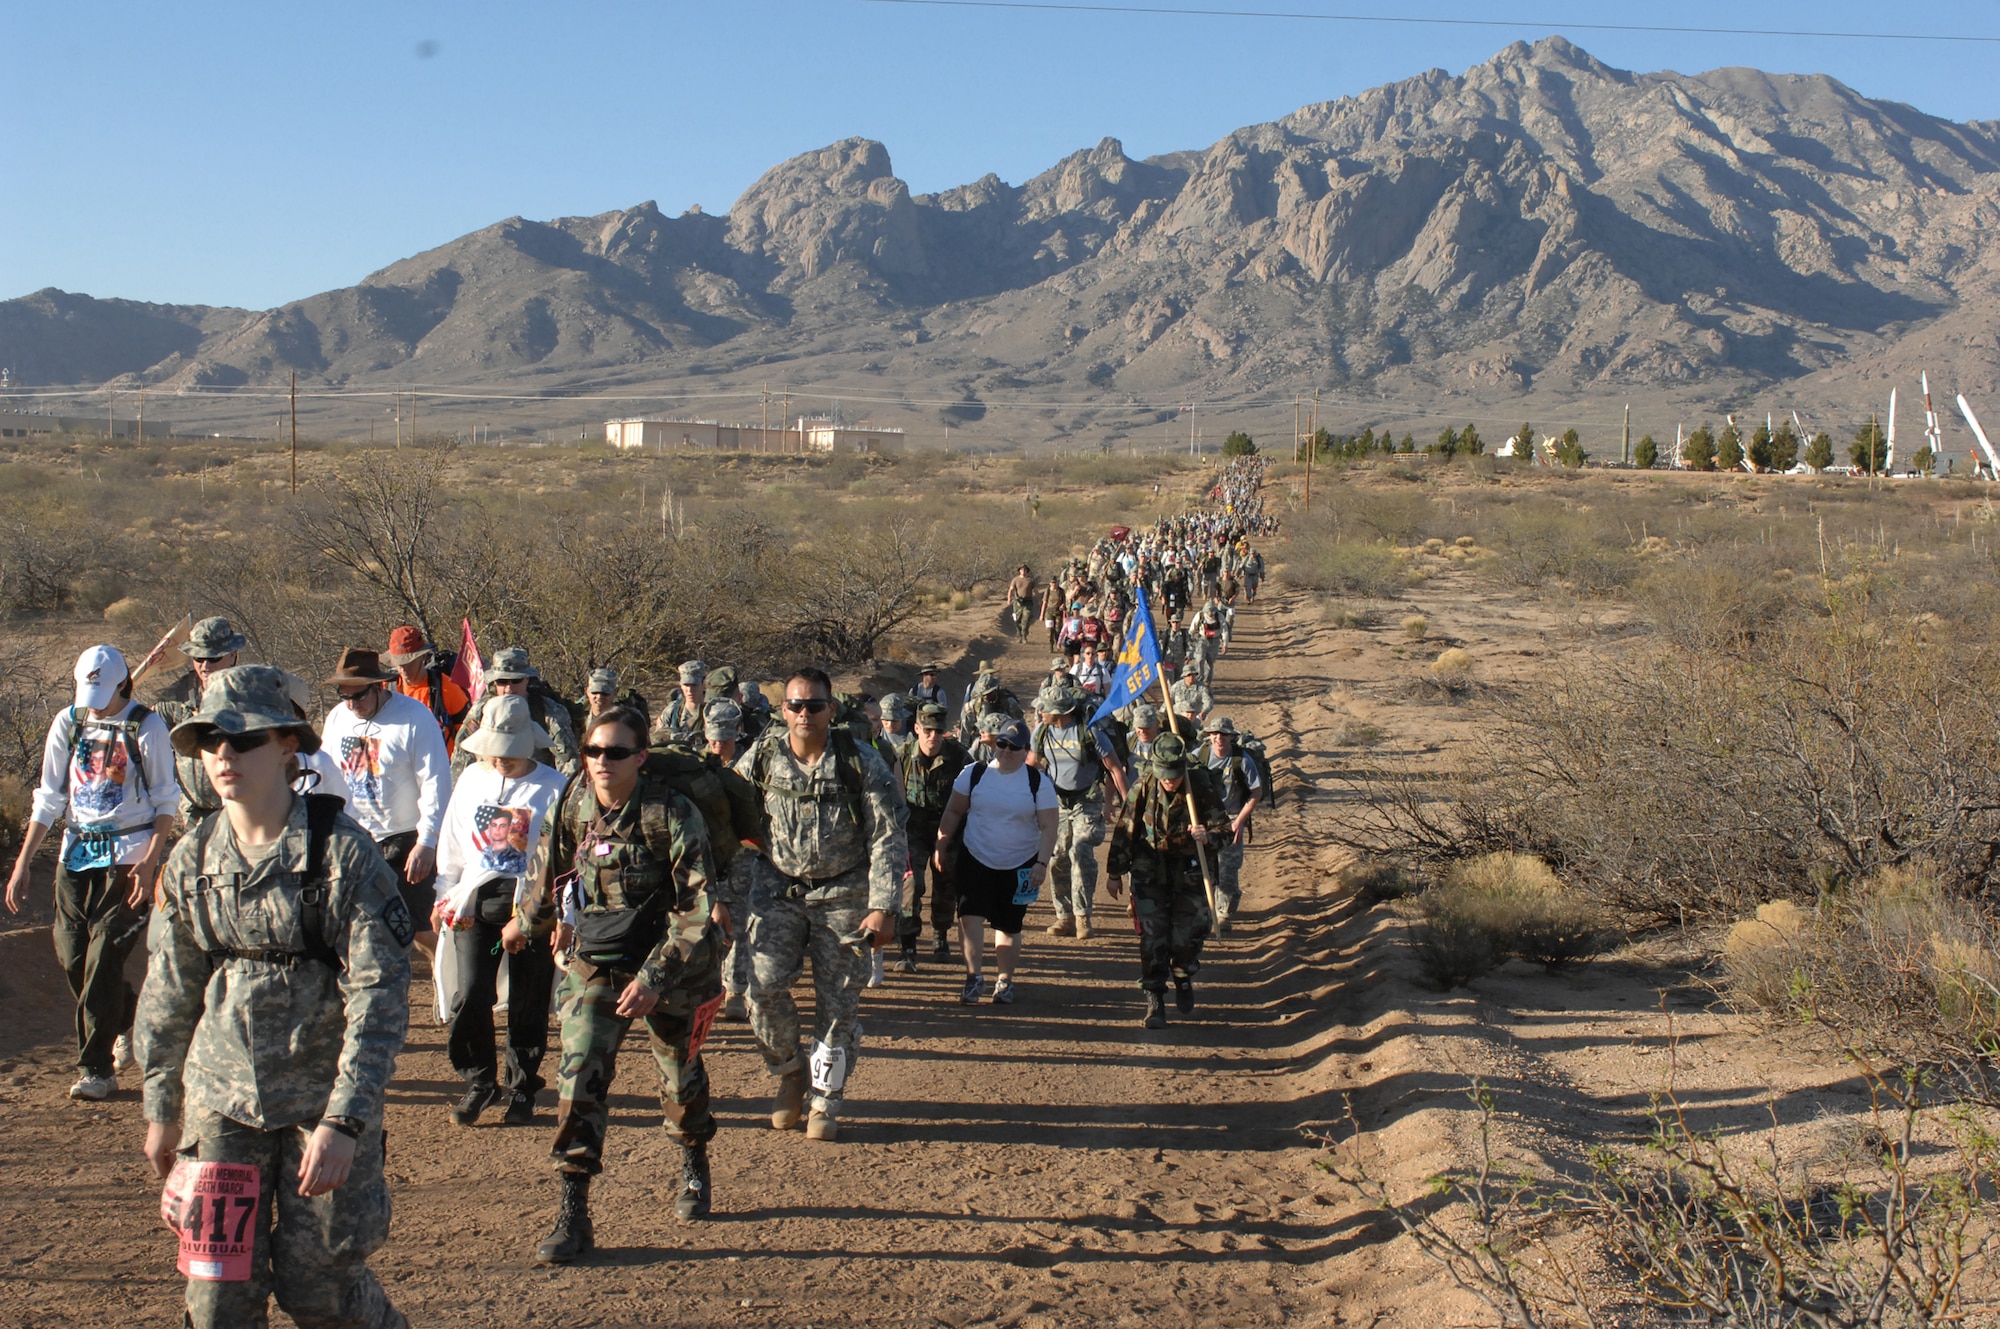 WHITE SANDS MISSILE RANGE, N.M. -- The 19th Annual Bataan Memorial Death March on March 30 paid tribute to the men who died as well as those who survived the death march and captivity during World War II. More than 4,400 military men and women from 50 states, territories and from around the world participated in the 19th annual event. (U.S. Air Force photo/Greg Allen)